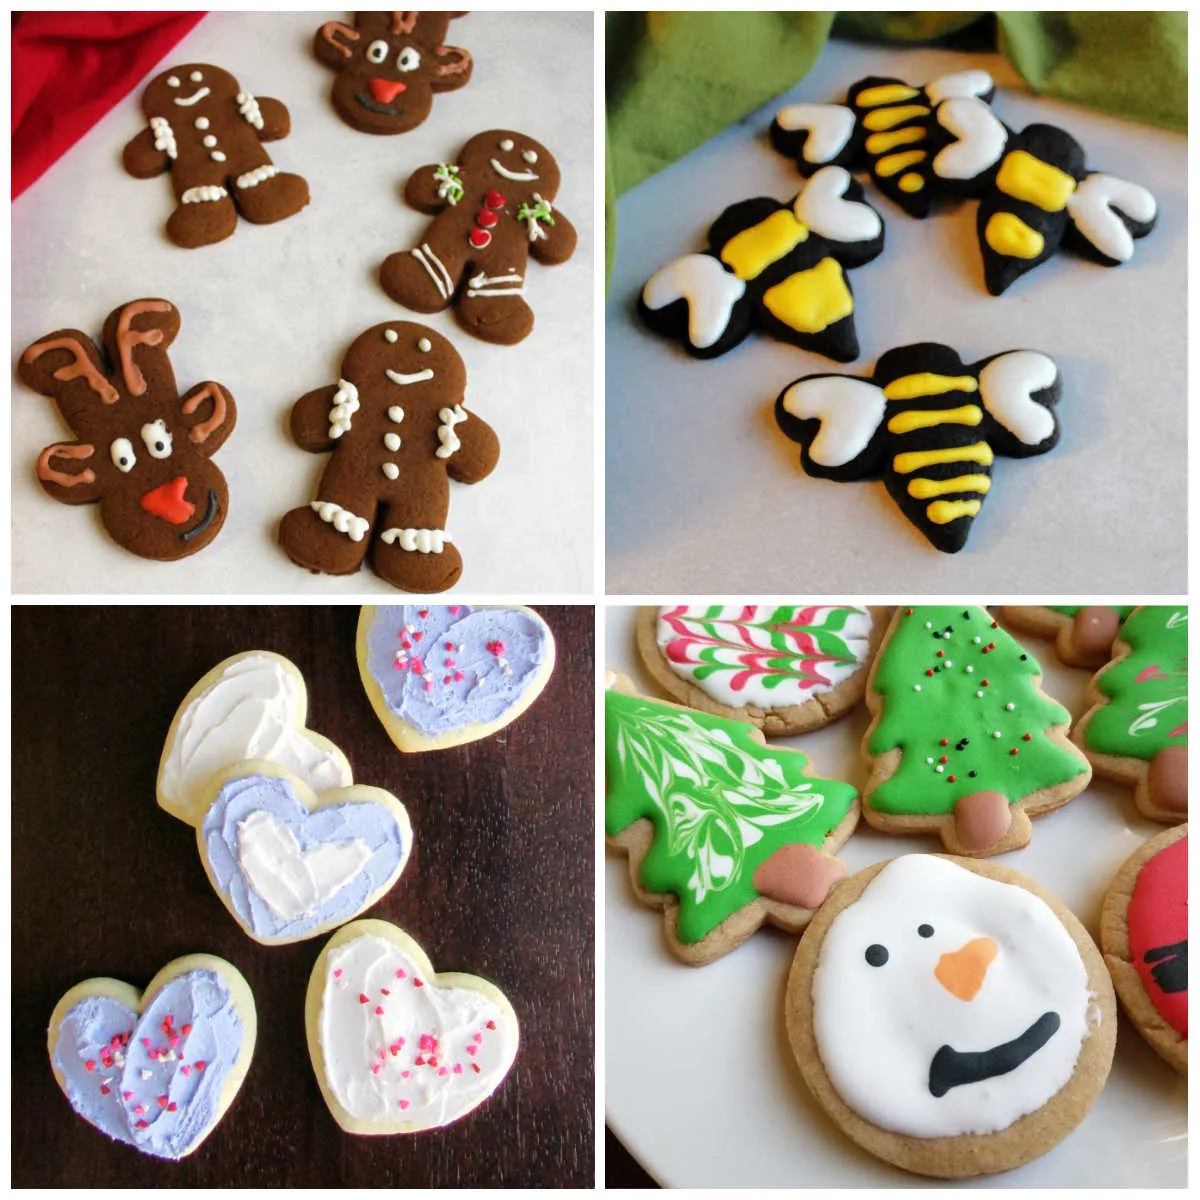 Collage of different types of decorated cut out cookies.